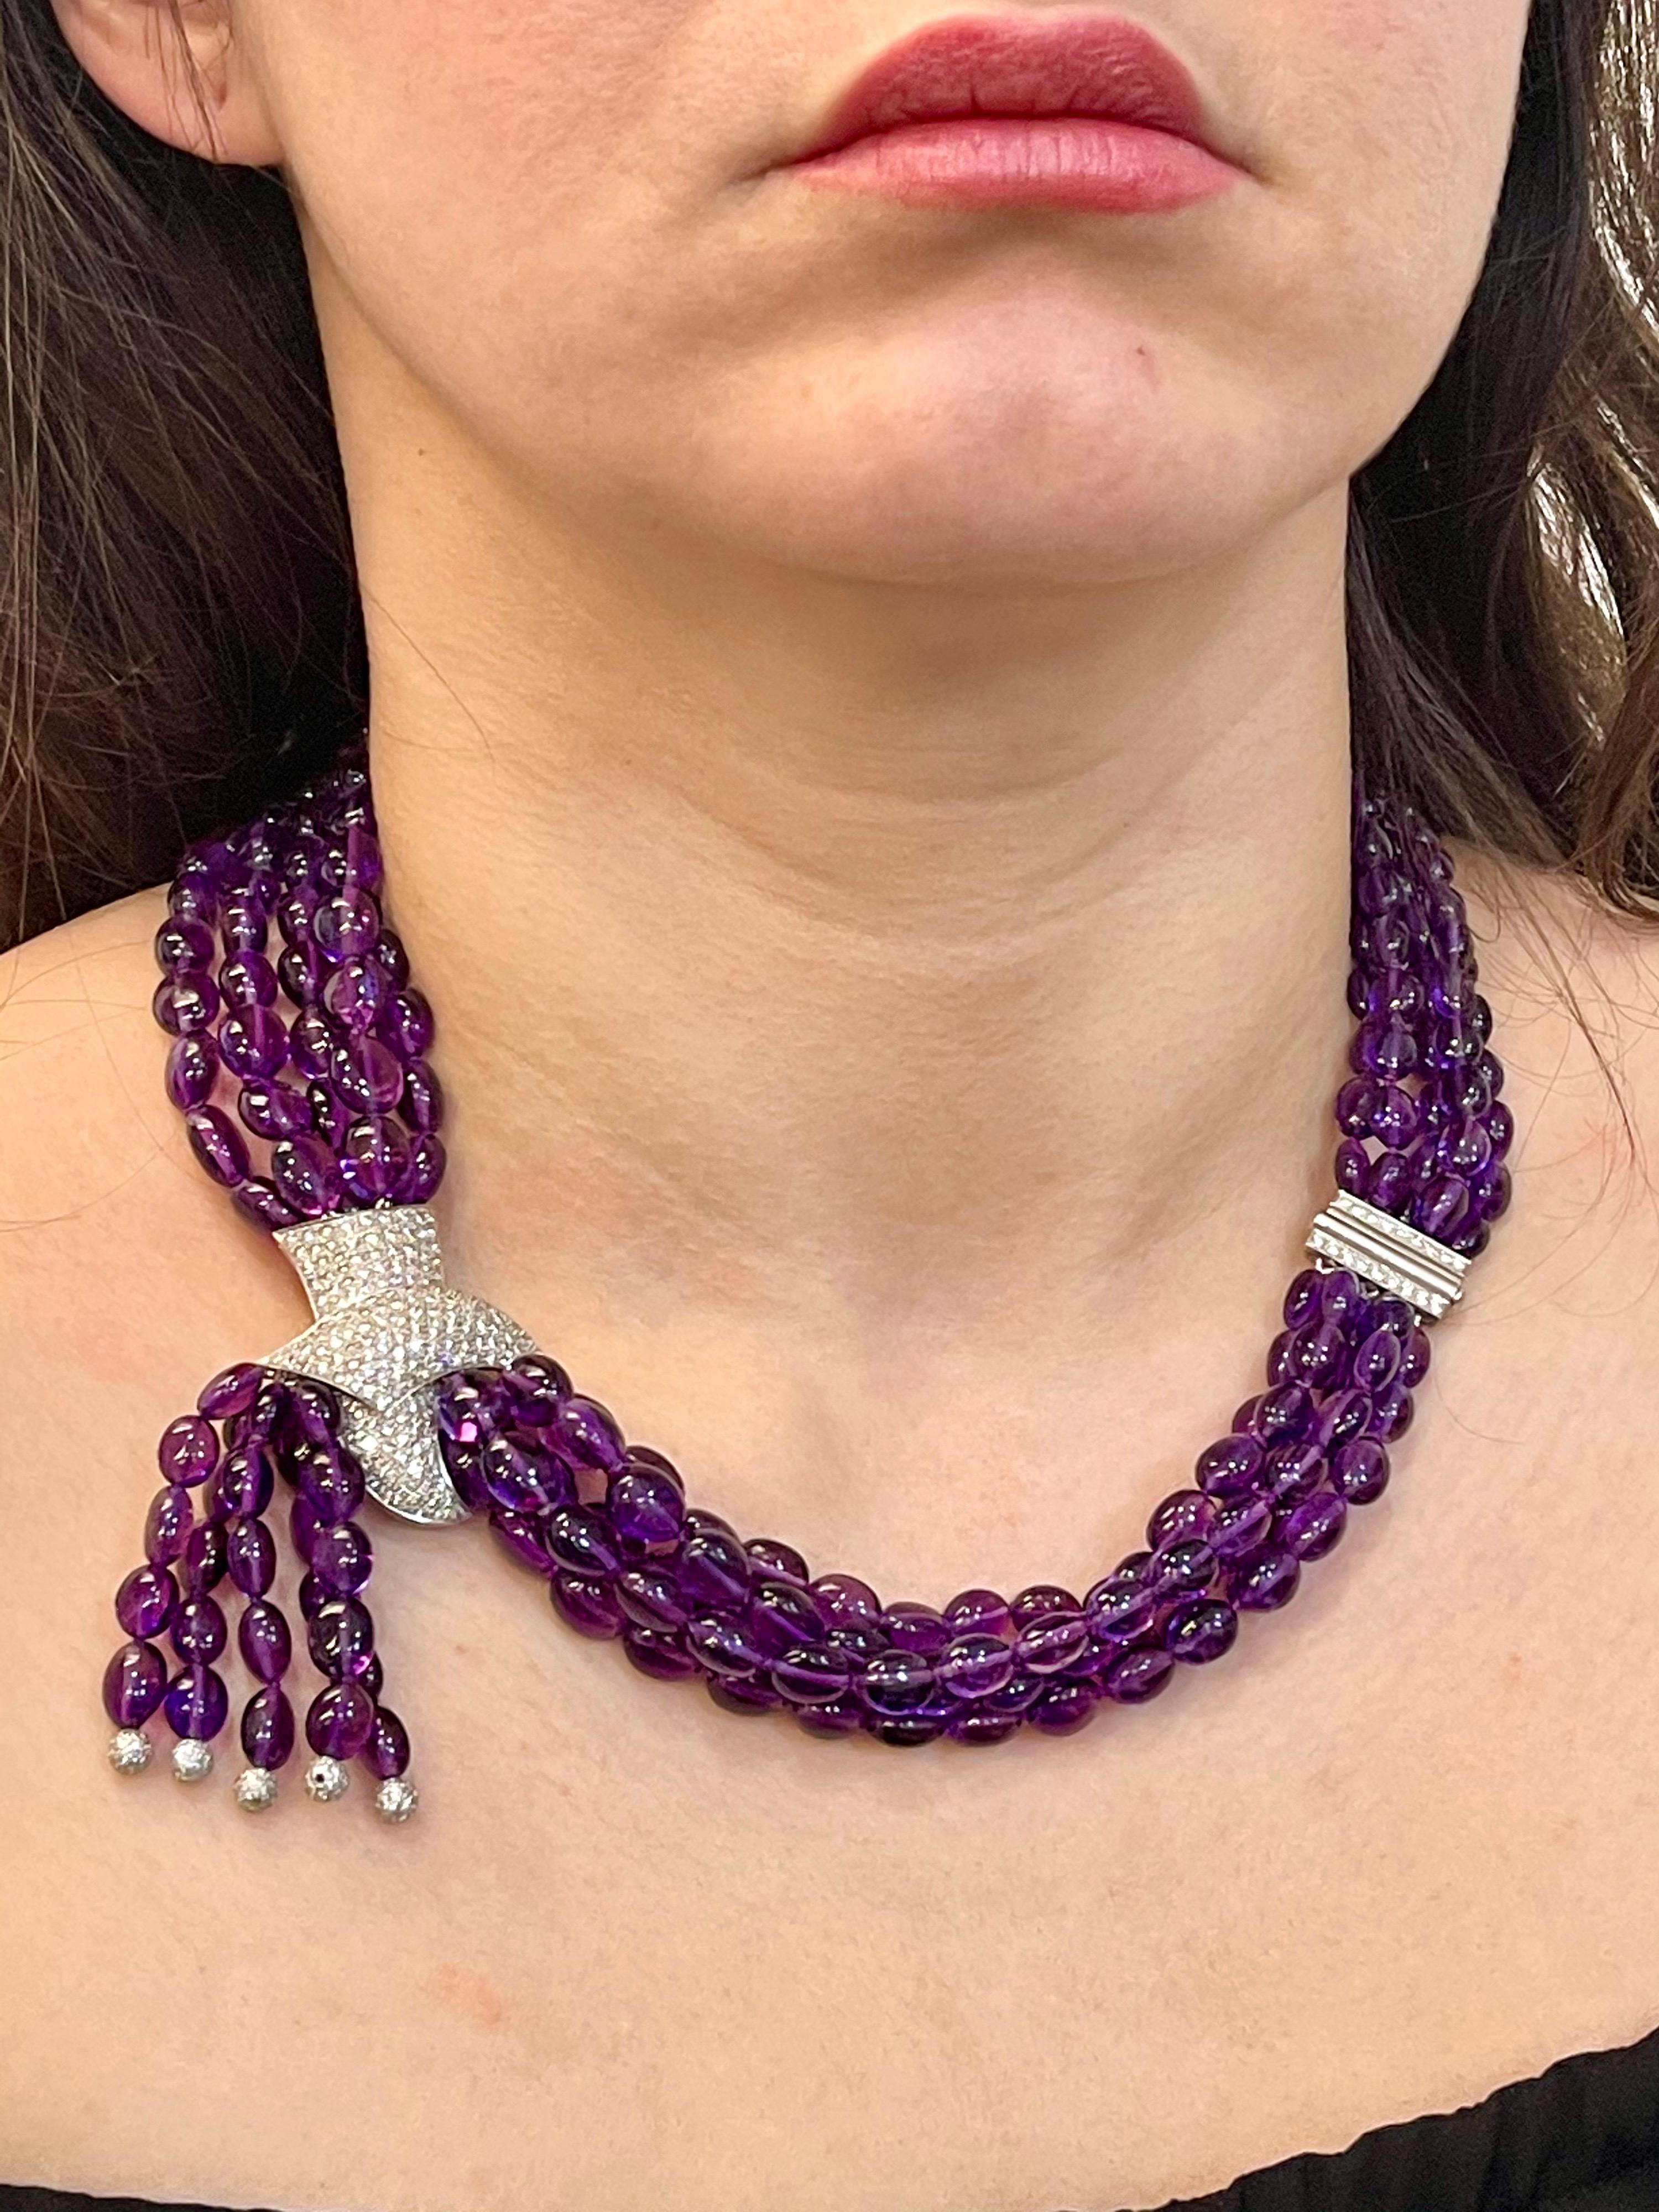 700 Ct Natural Amethyst Multi Layer Bead Necklace in Platinum with 9 Ct Diamonds For Sale 2